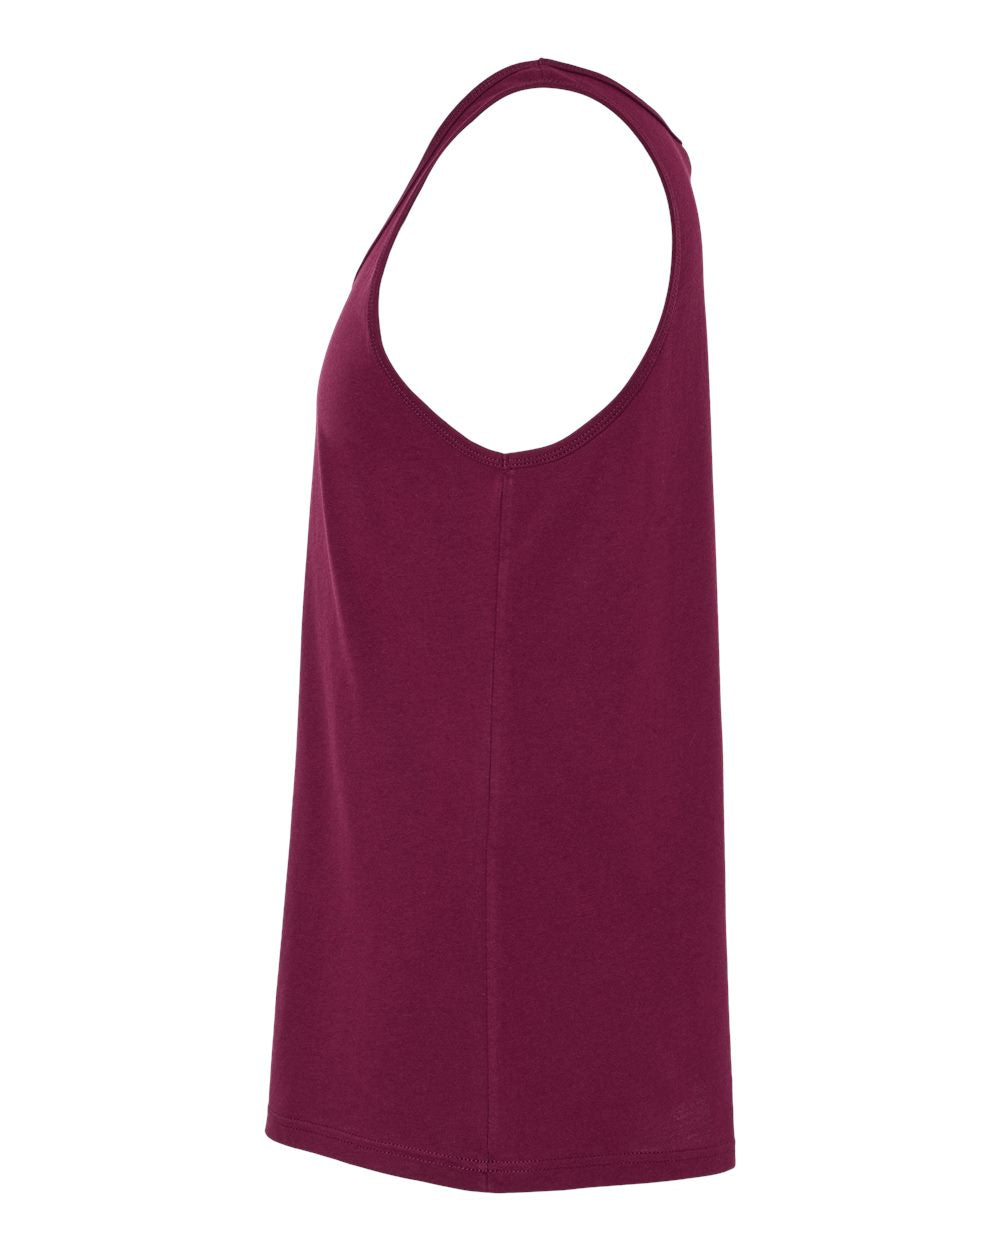 Unisex Jersey Tank- 2 Colors Available